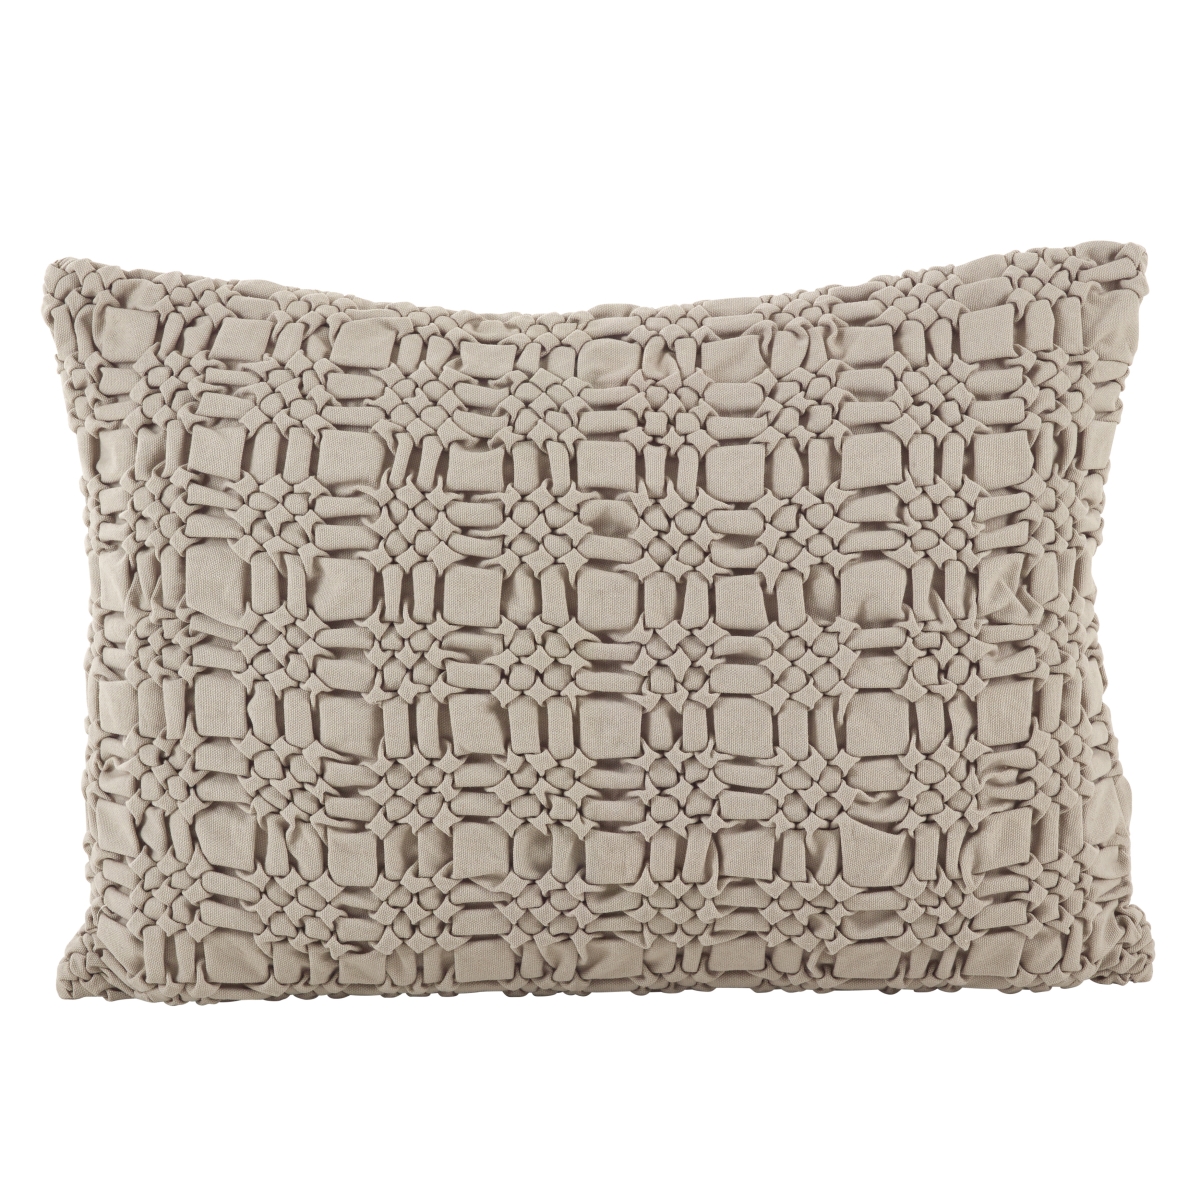 0002.t1420b Smocked Design Decorative Accent Cotton Down Filled Throw Pillow, Taupe